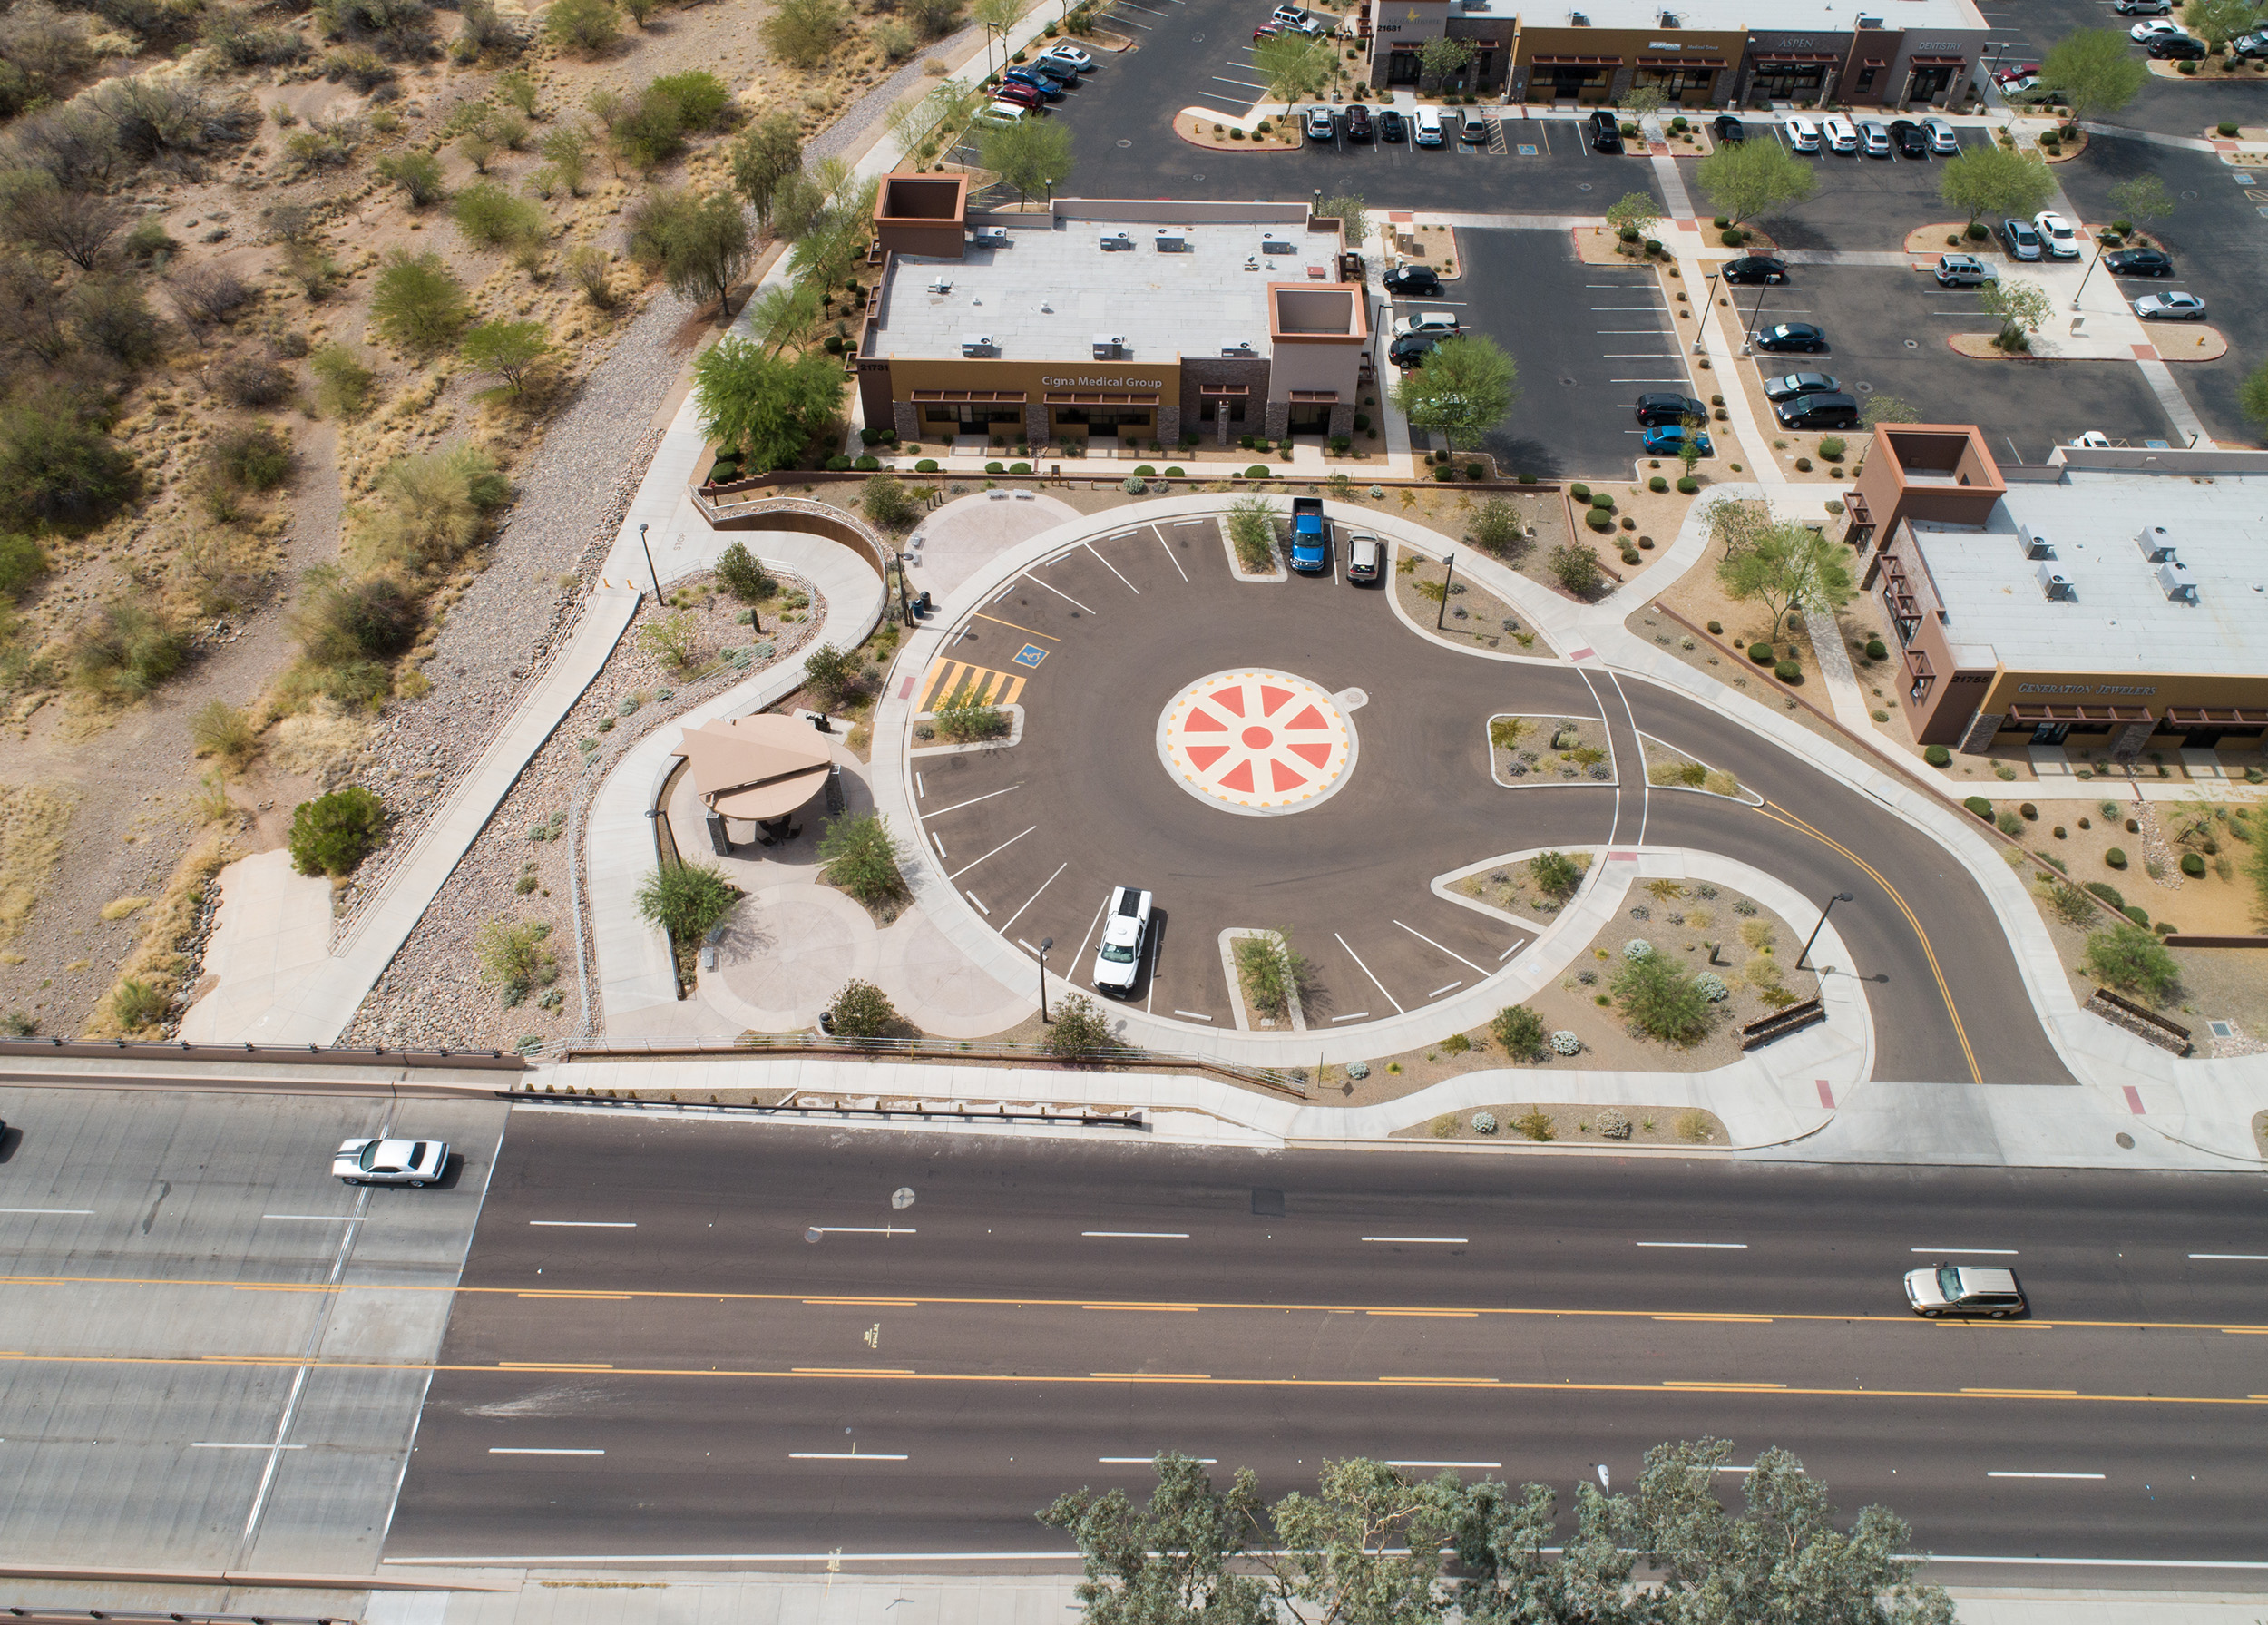 Wilson & Company designed the spoked wheel-inspired parking lot at the New River Trailhead.